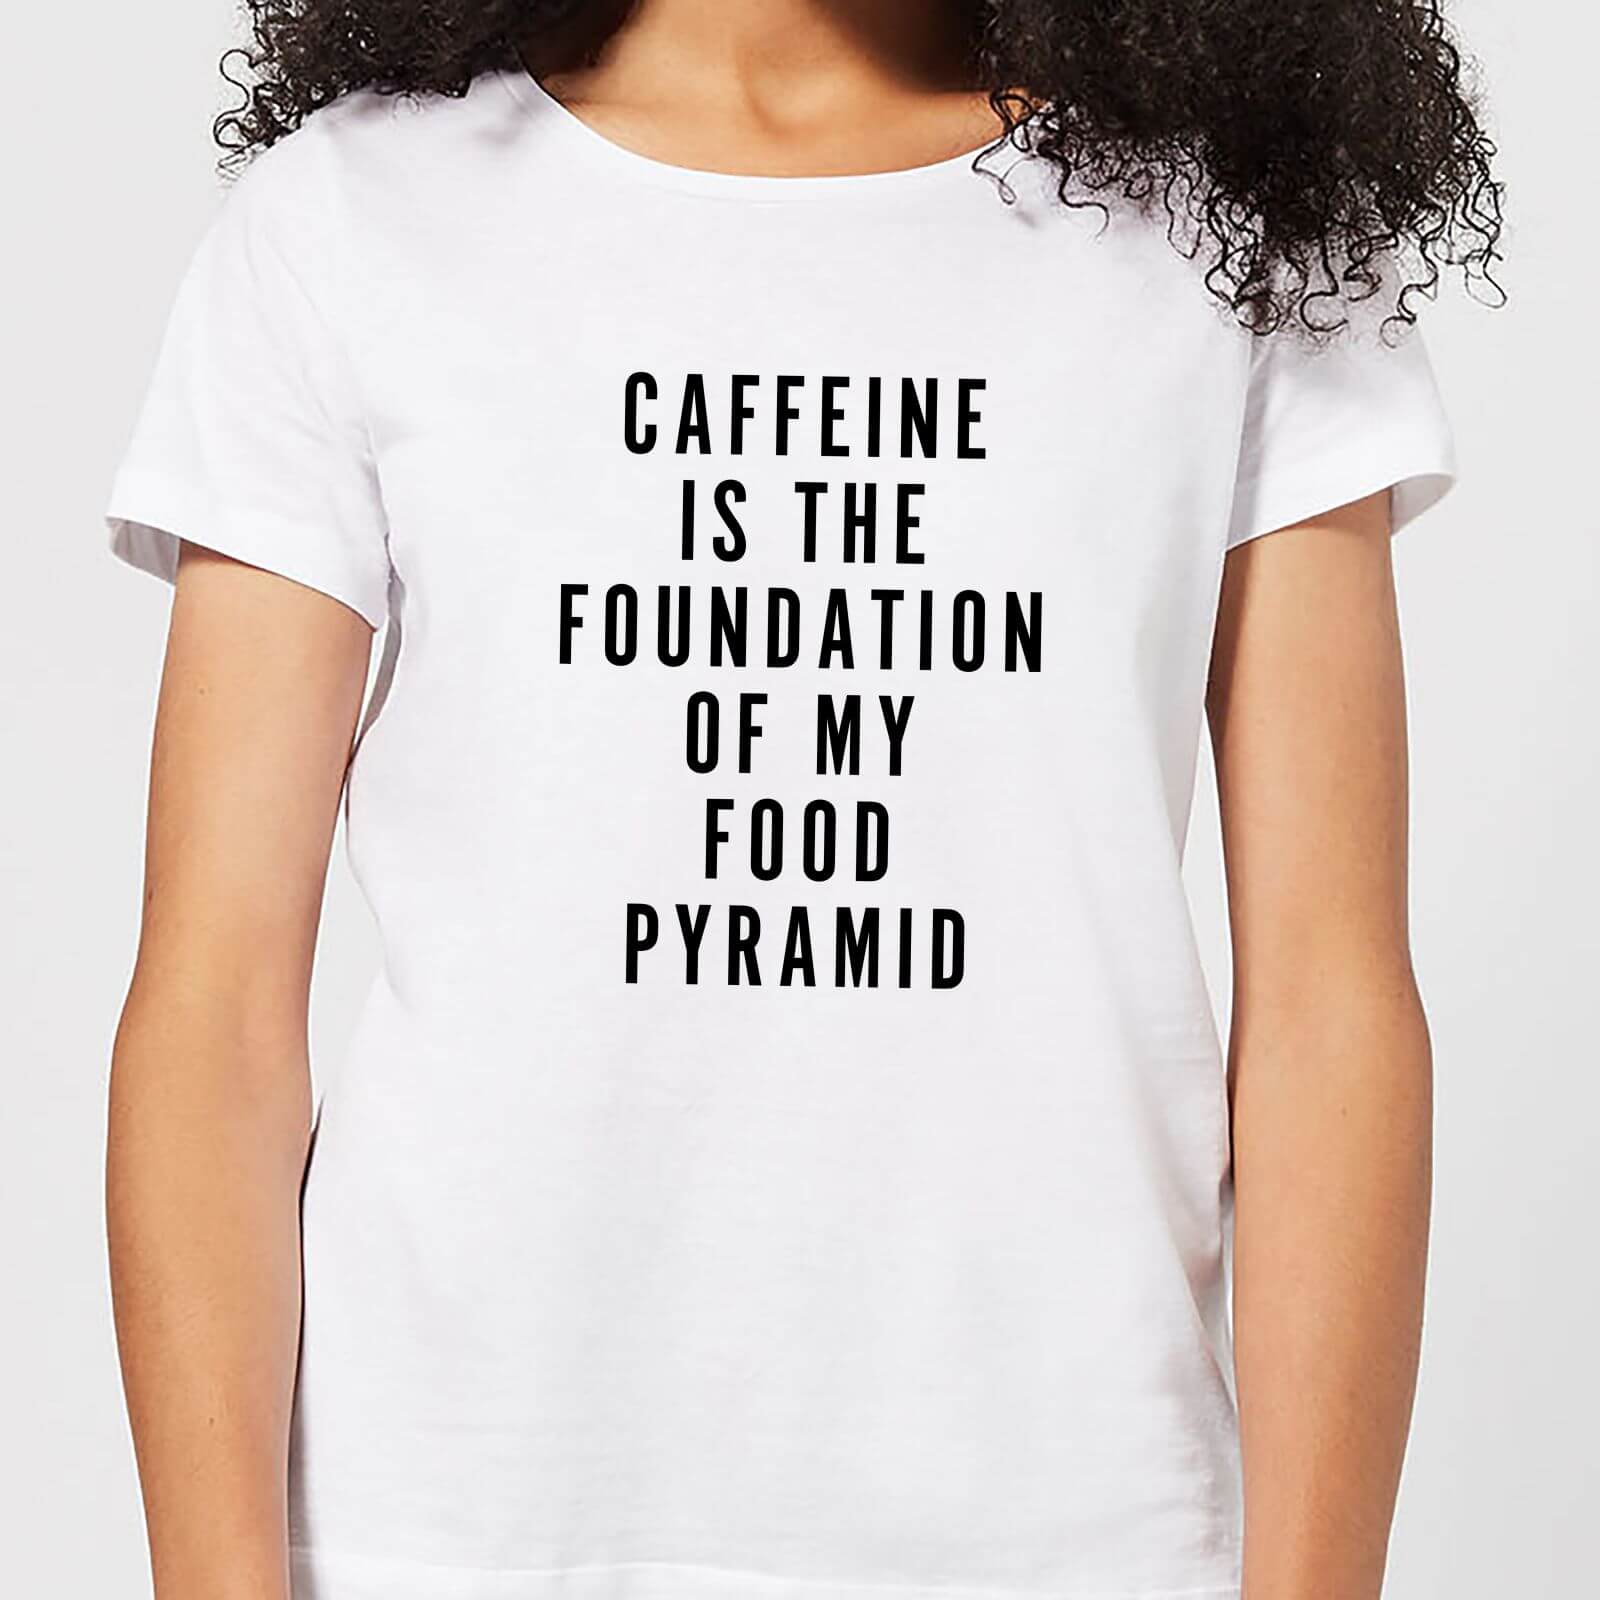 Caffeine Is The Foundation Of My Food Pyramid Women's T-Shirt - White - S - White